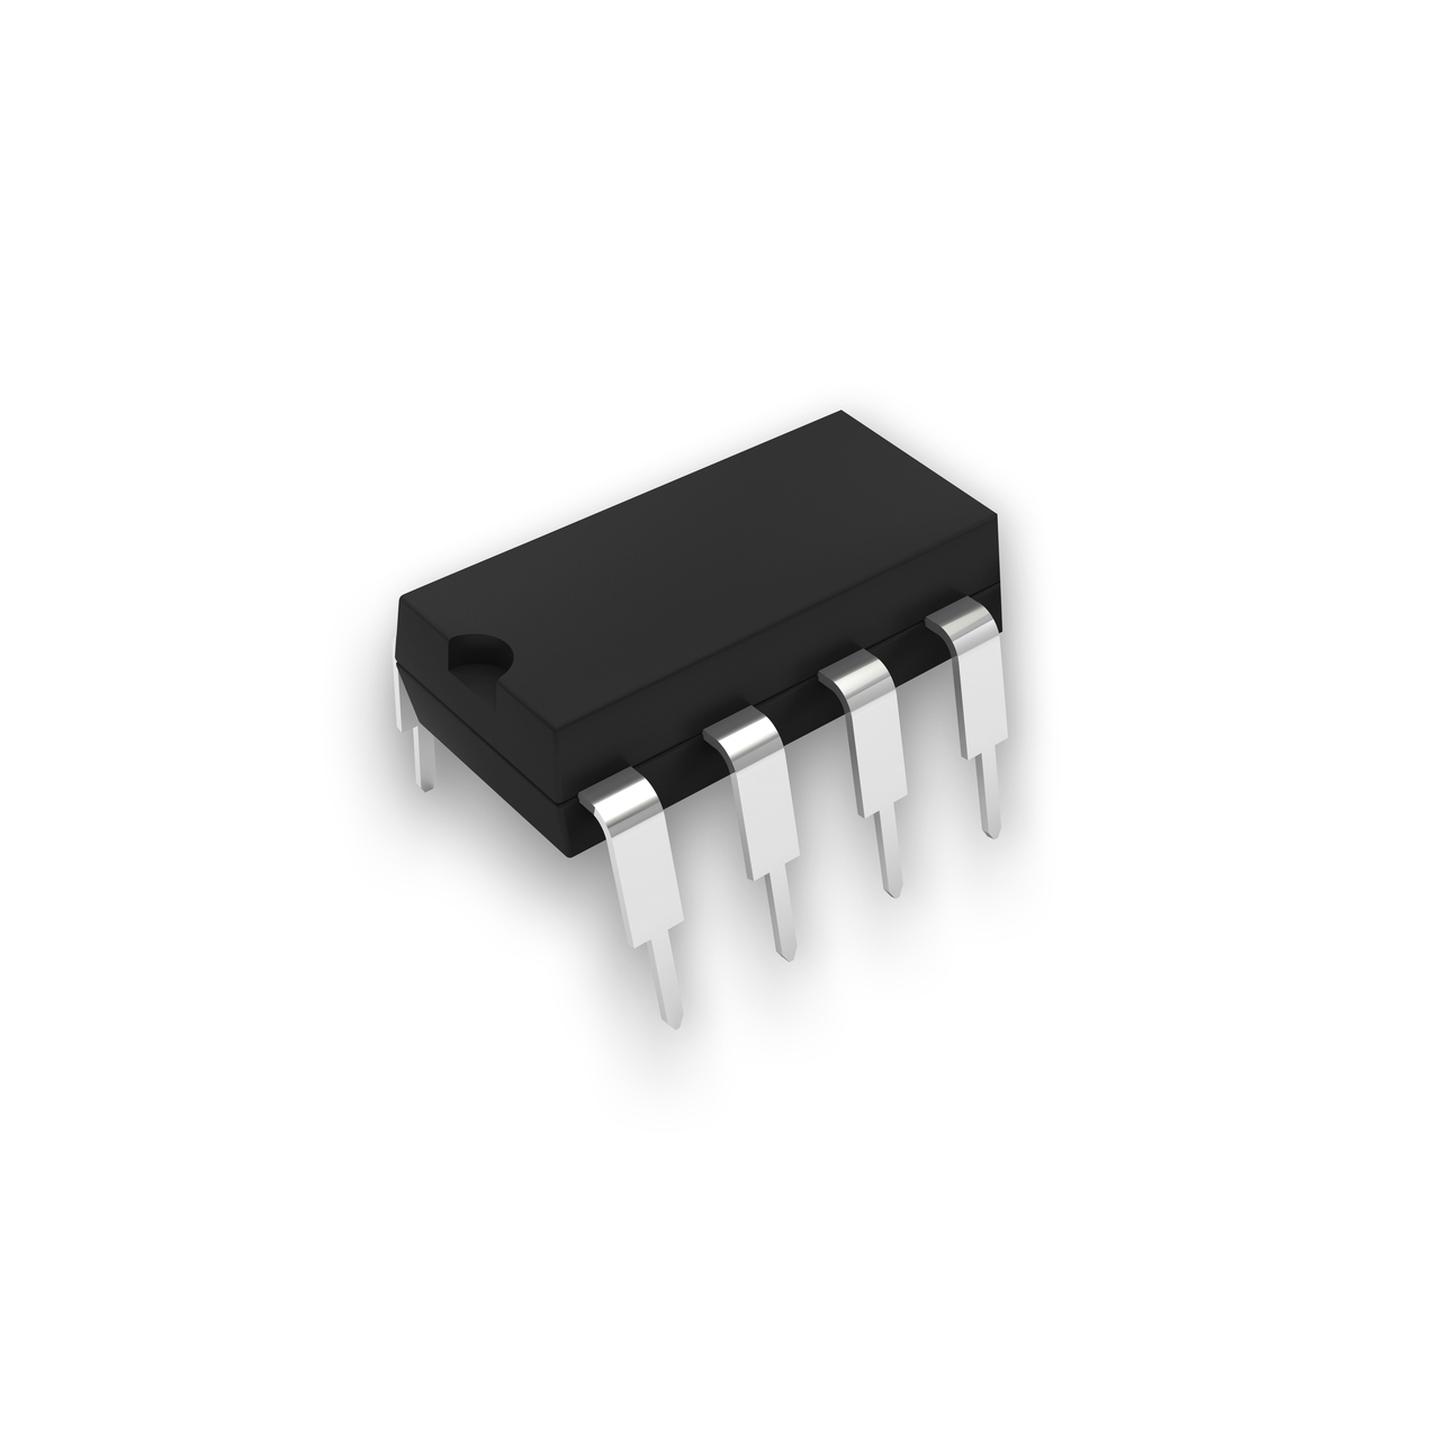 LM393 Low Power Dual Comparator Linear IC